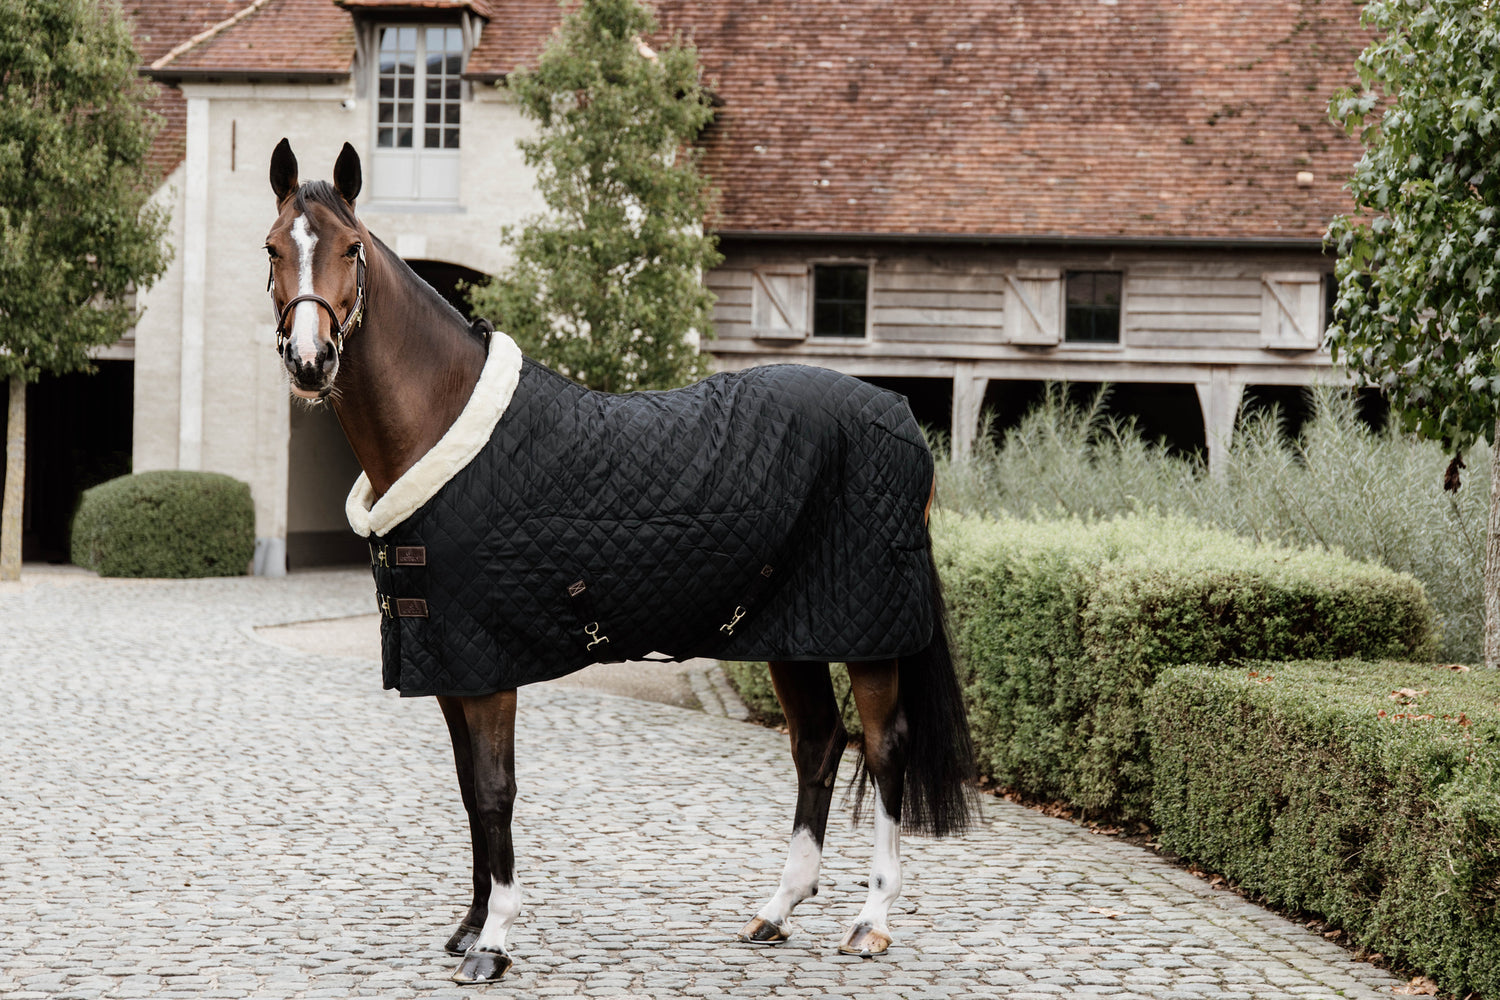 The Kentucky Horsewear Show Rug  has a contoured shape gives the perfect fit. The Faux fur creates tiny air pockets and as a result traps air, retaining the horses body heat.   The luxurious soft artificial fur lining prevents rubbing whilst providing ultimate comfort and warmth for your horse.